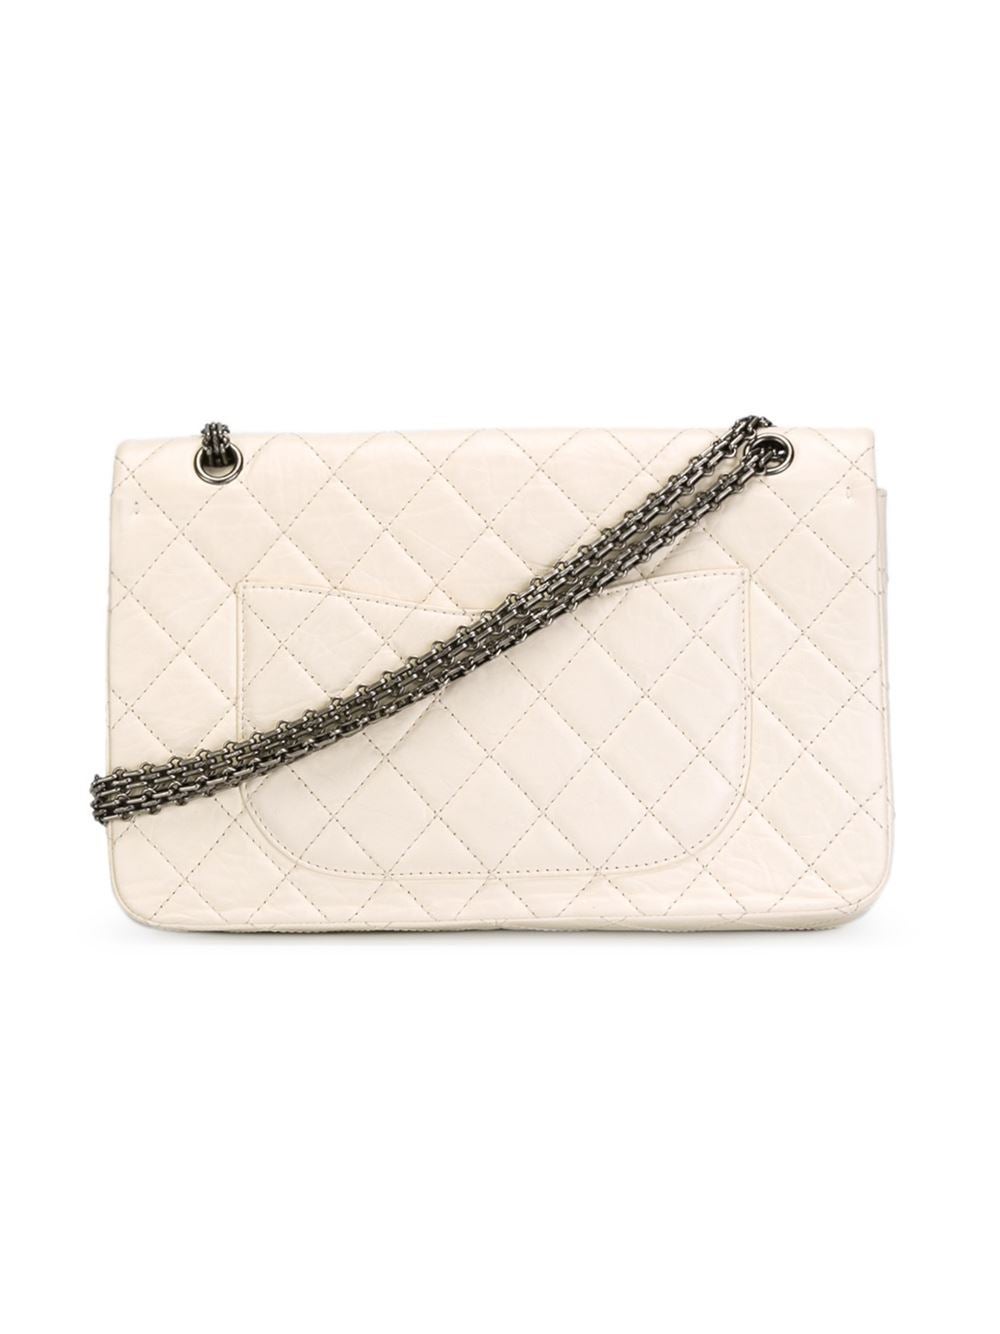 This white calf leather reissue flap shoulder bag from Chanel features fold-over top with twist-lock closure, a quilted effect, a silver-tone chain shoulder strap, a back slip pocket, an internal logo stamp, multiple interior compartments, an